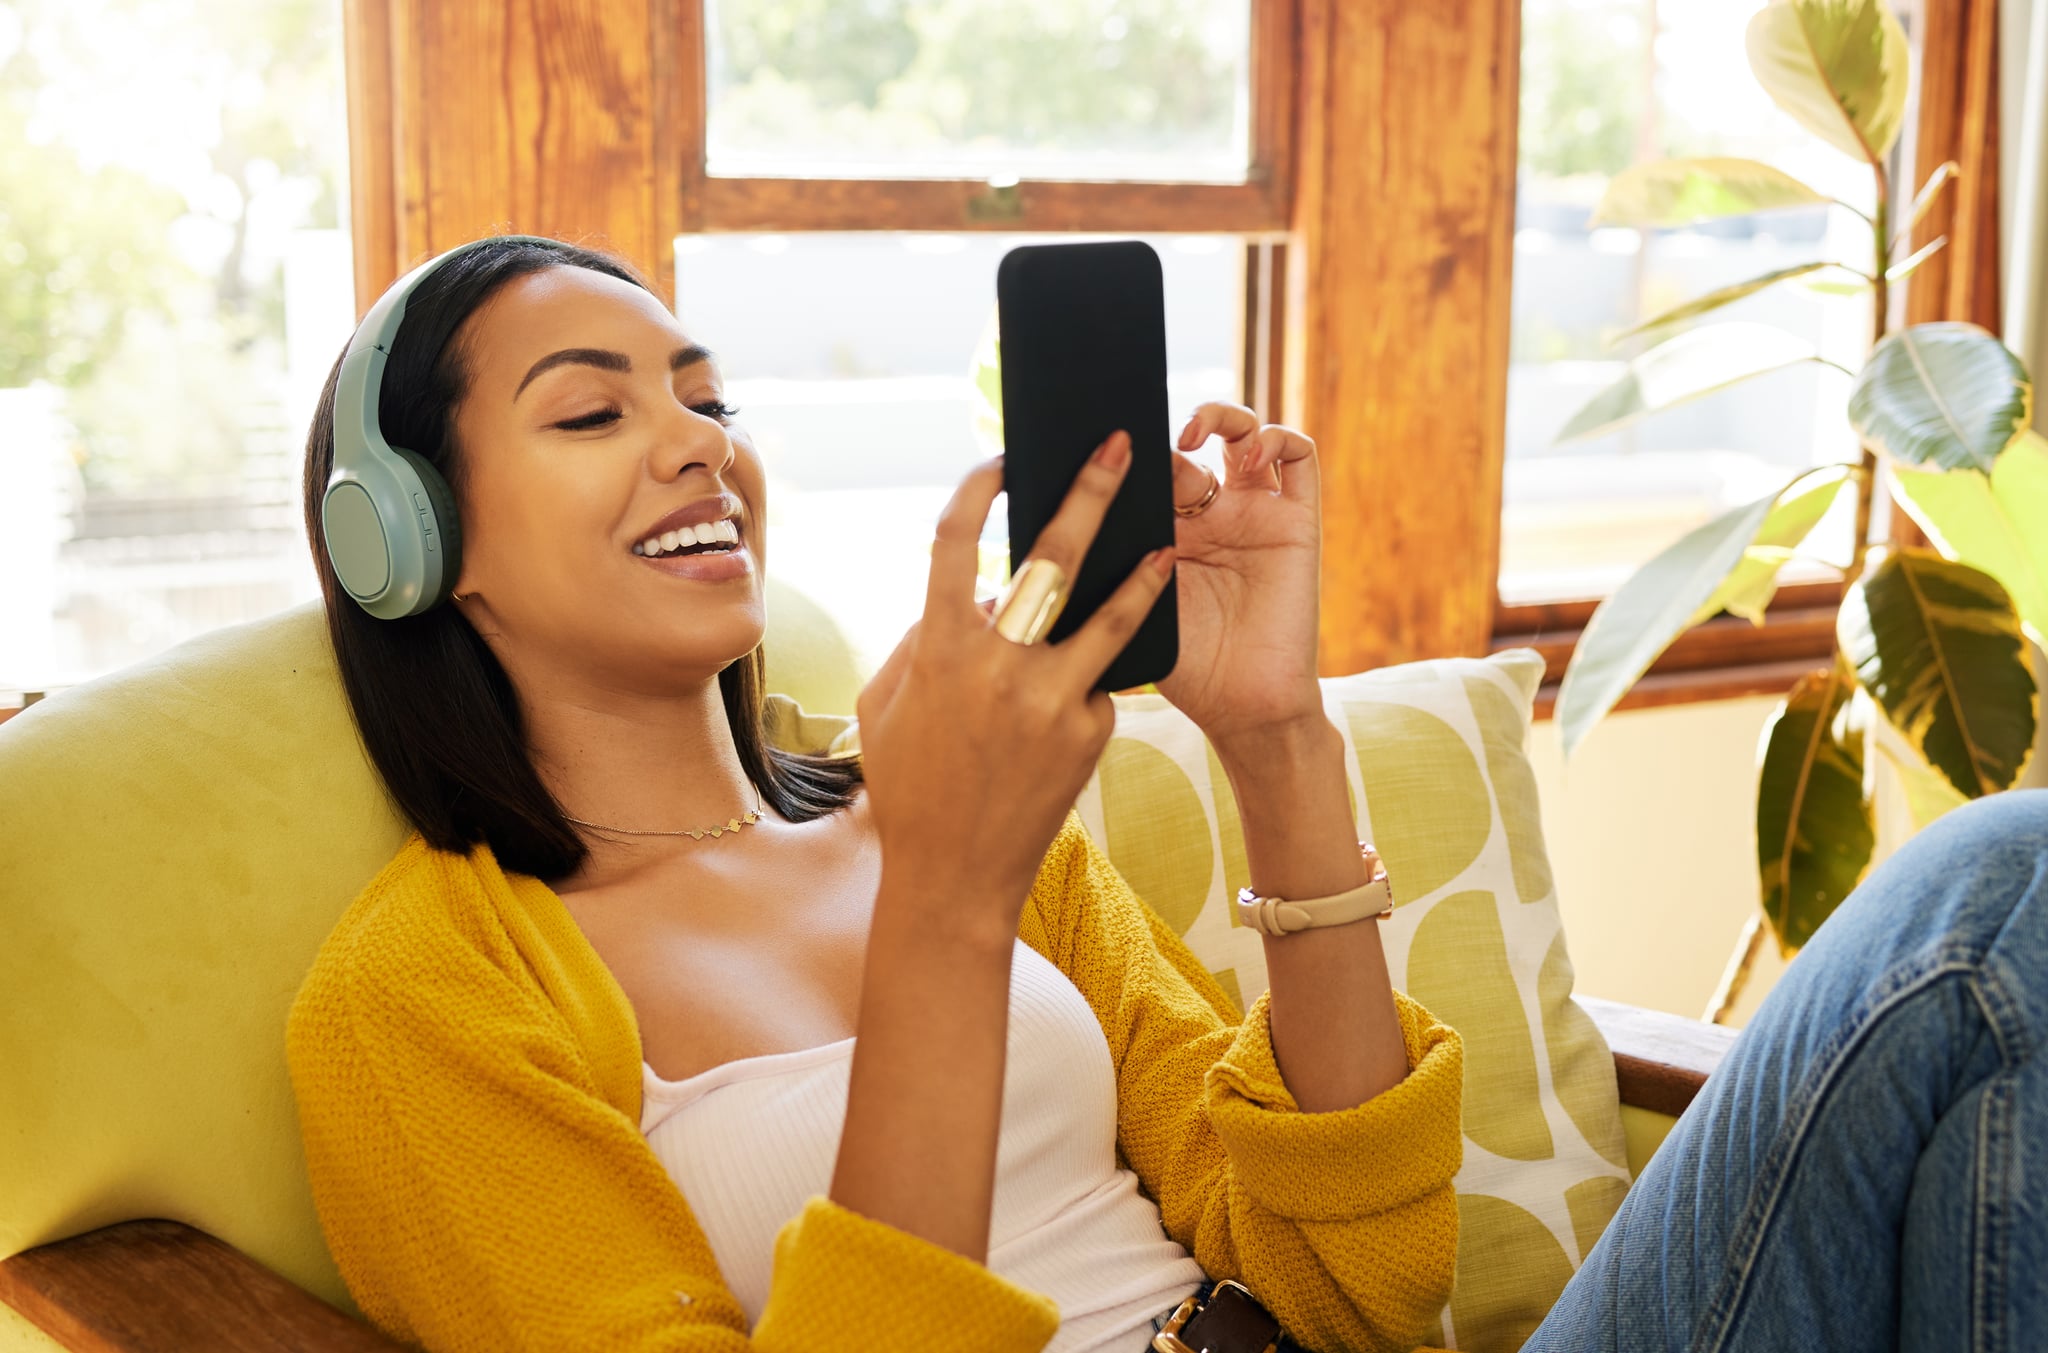 Woman updating contact names on her smartphone and listening to music on headphones while comfortable and relaxing in a bright living room.